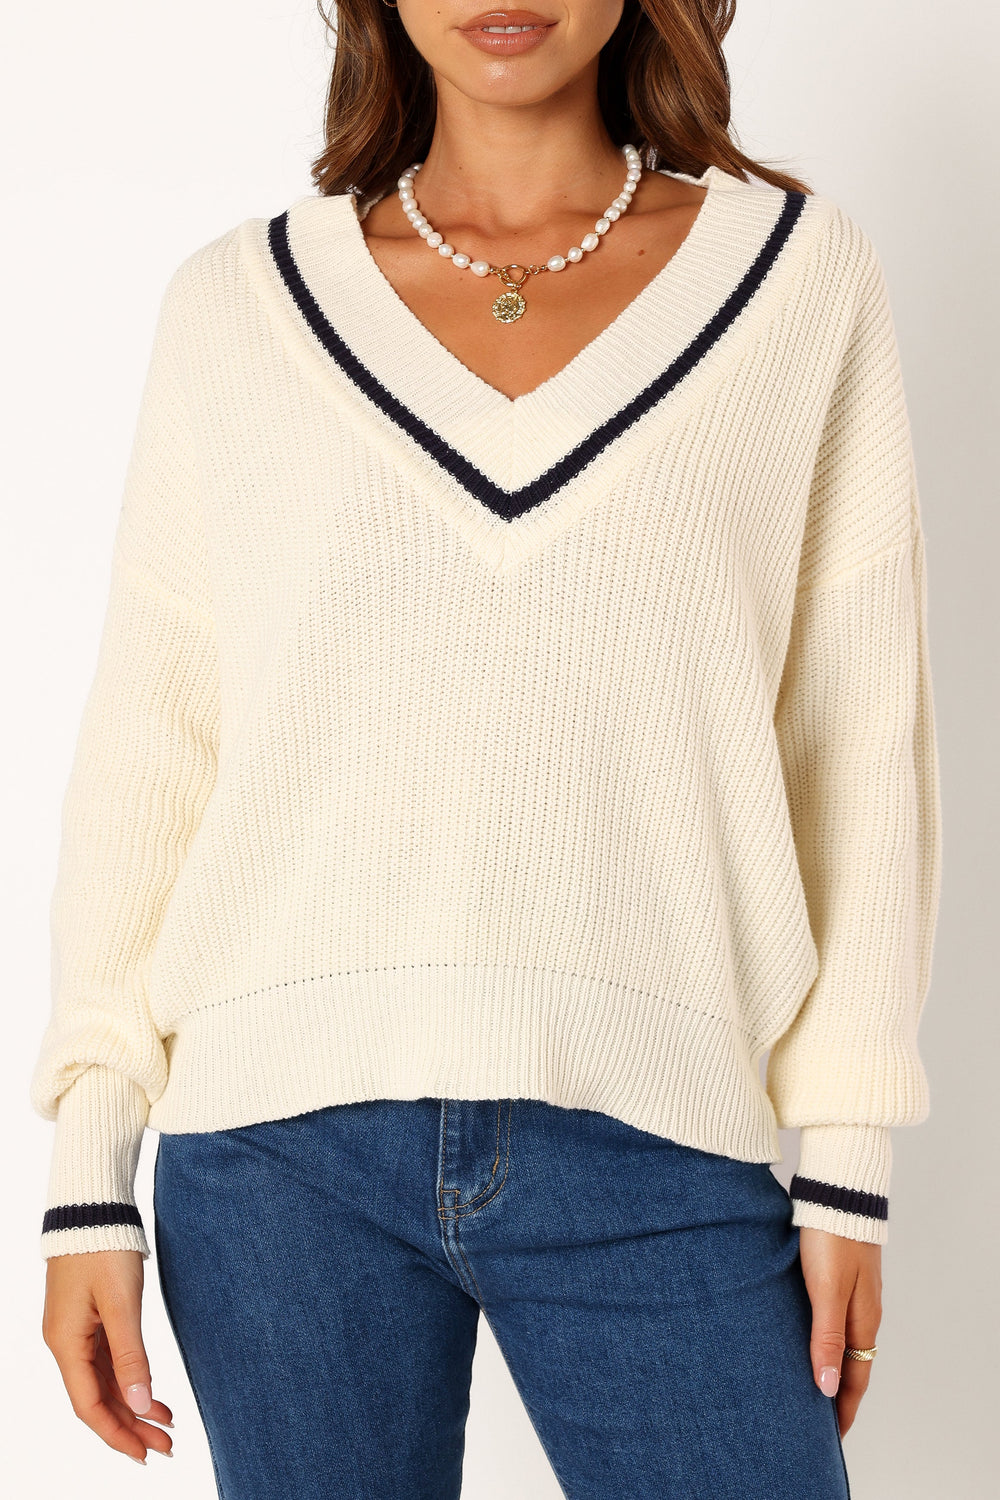 Contrast Elbow Patch Sweater by Victoria Beckham for $115